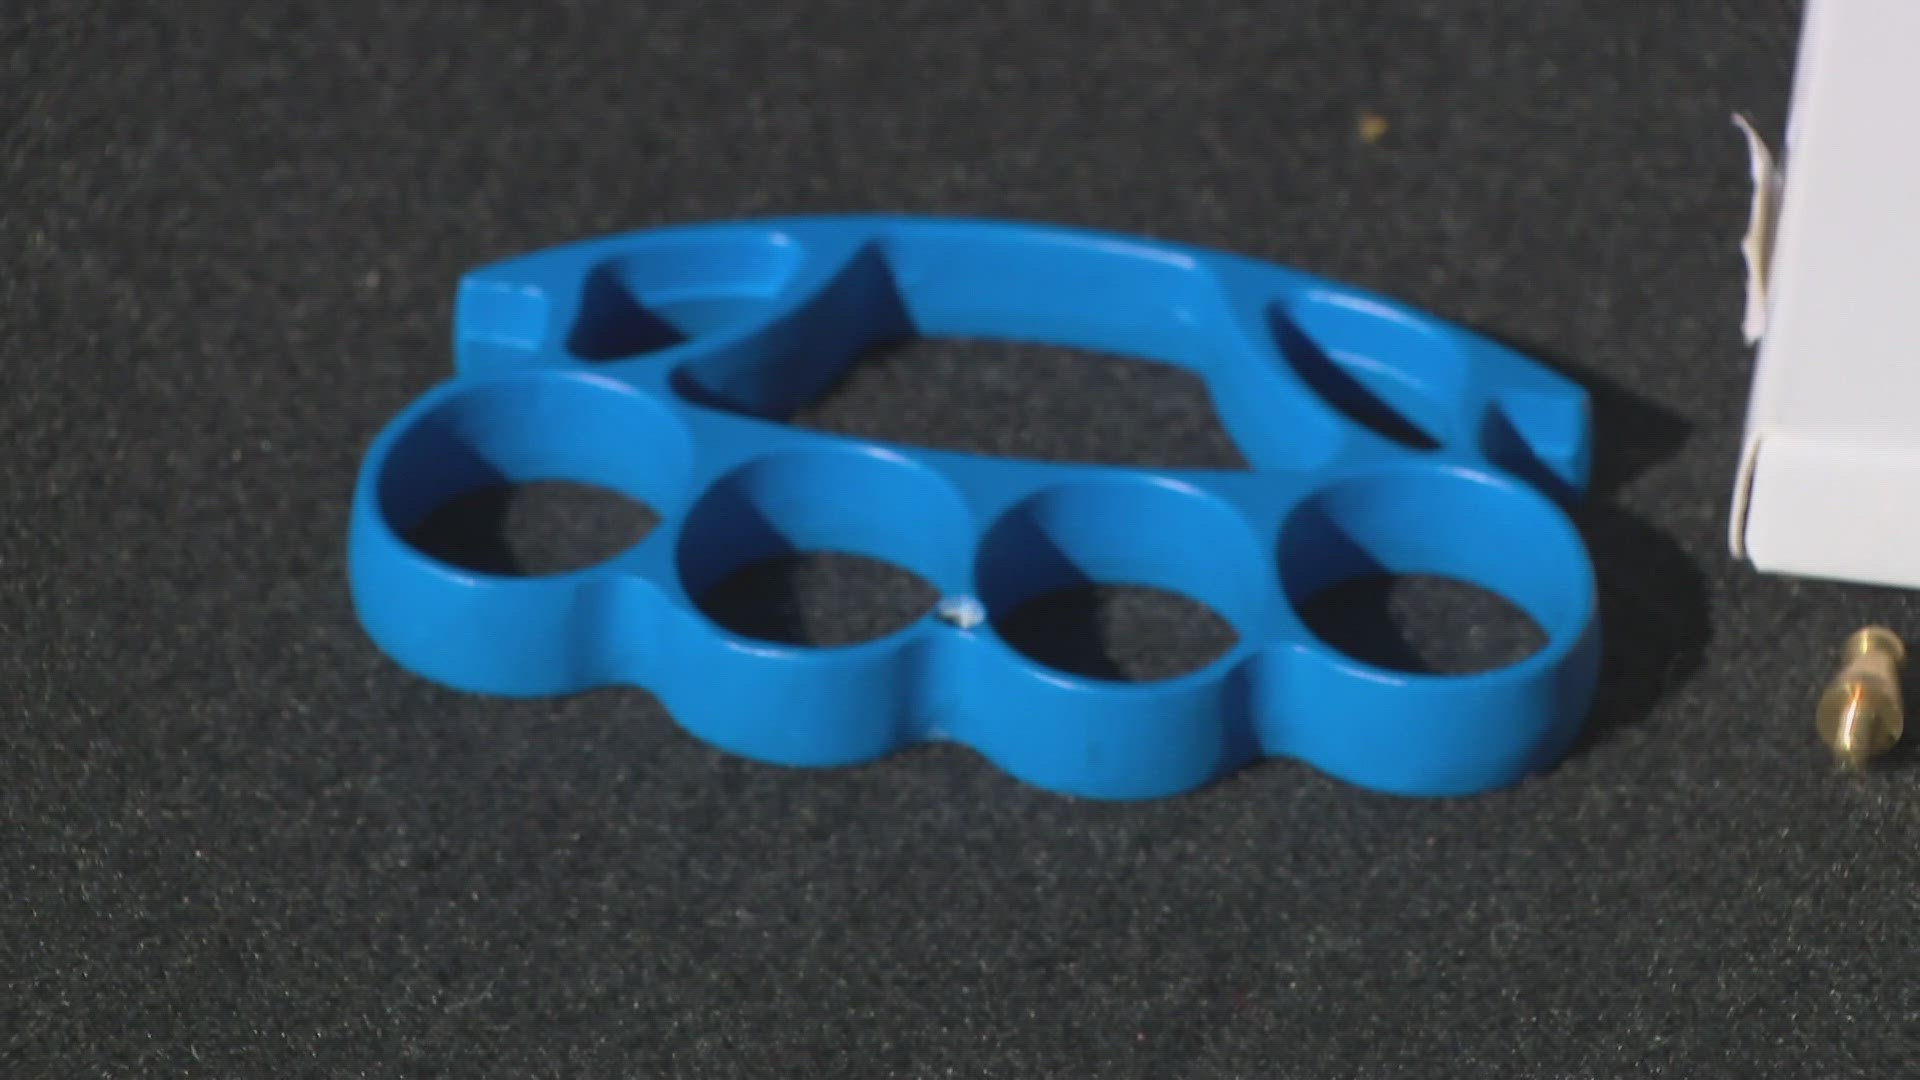 A lawmaker is currently looking to ban brass knuckles in Arizona. 12News asked him if brass knuckles branded as belt buckles would be a loophole.